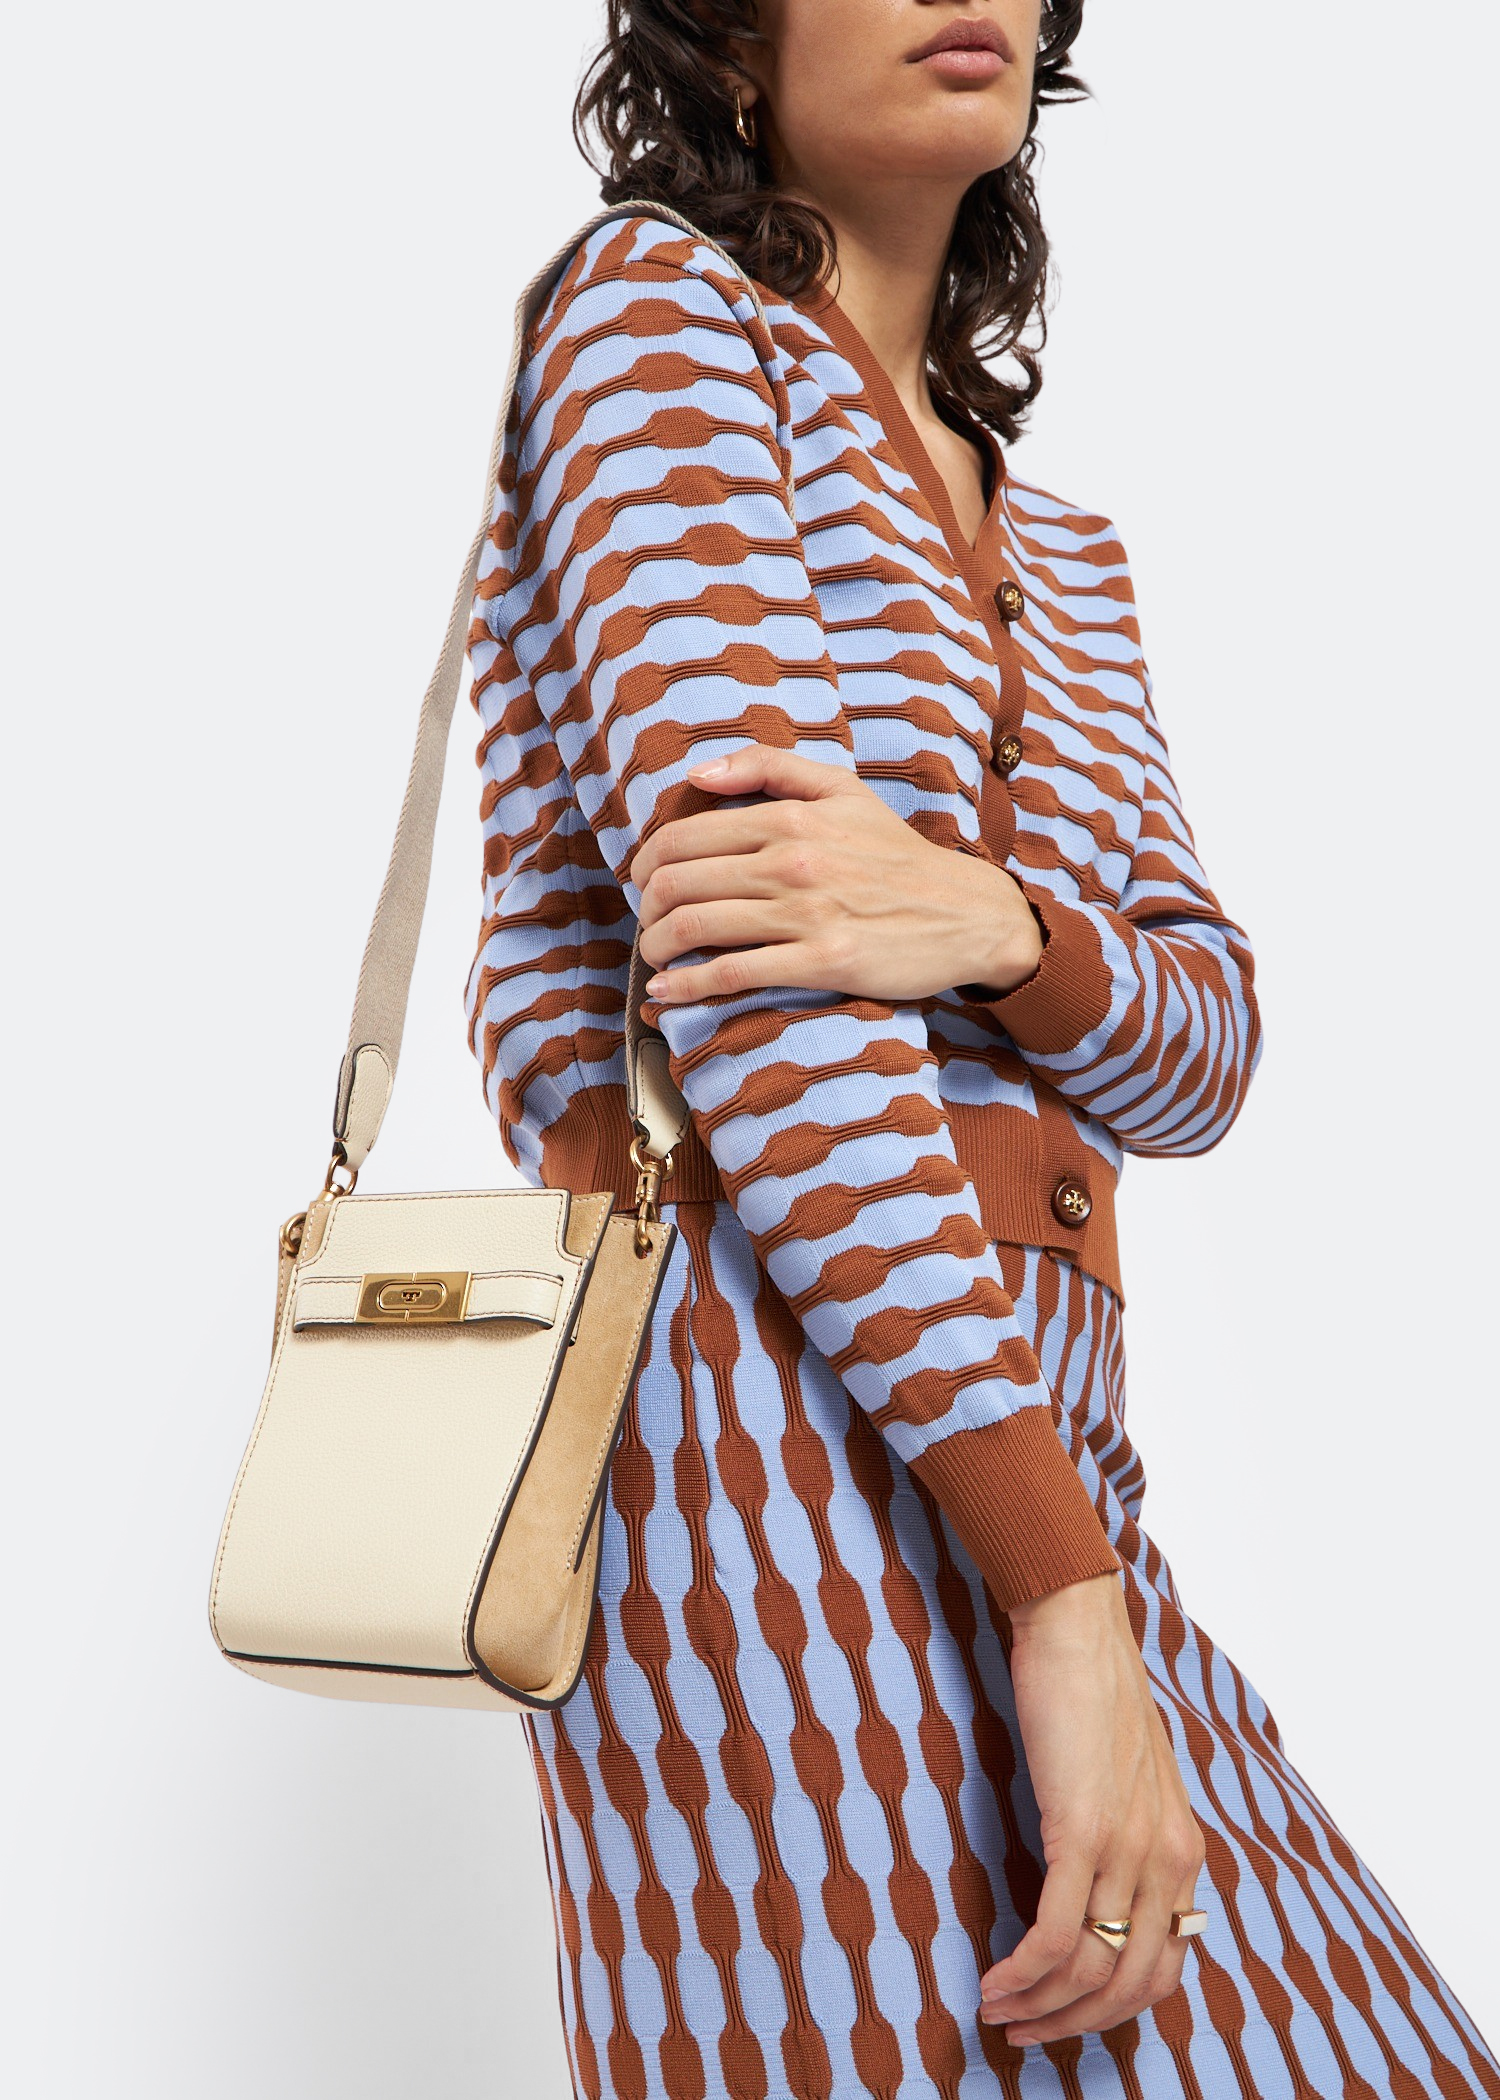 Work or Play? Tory Burch Lee Radziwill Double Bucket Does Both